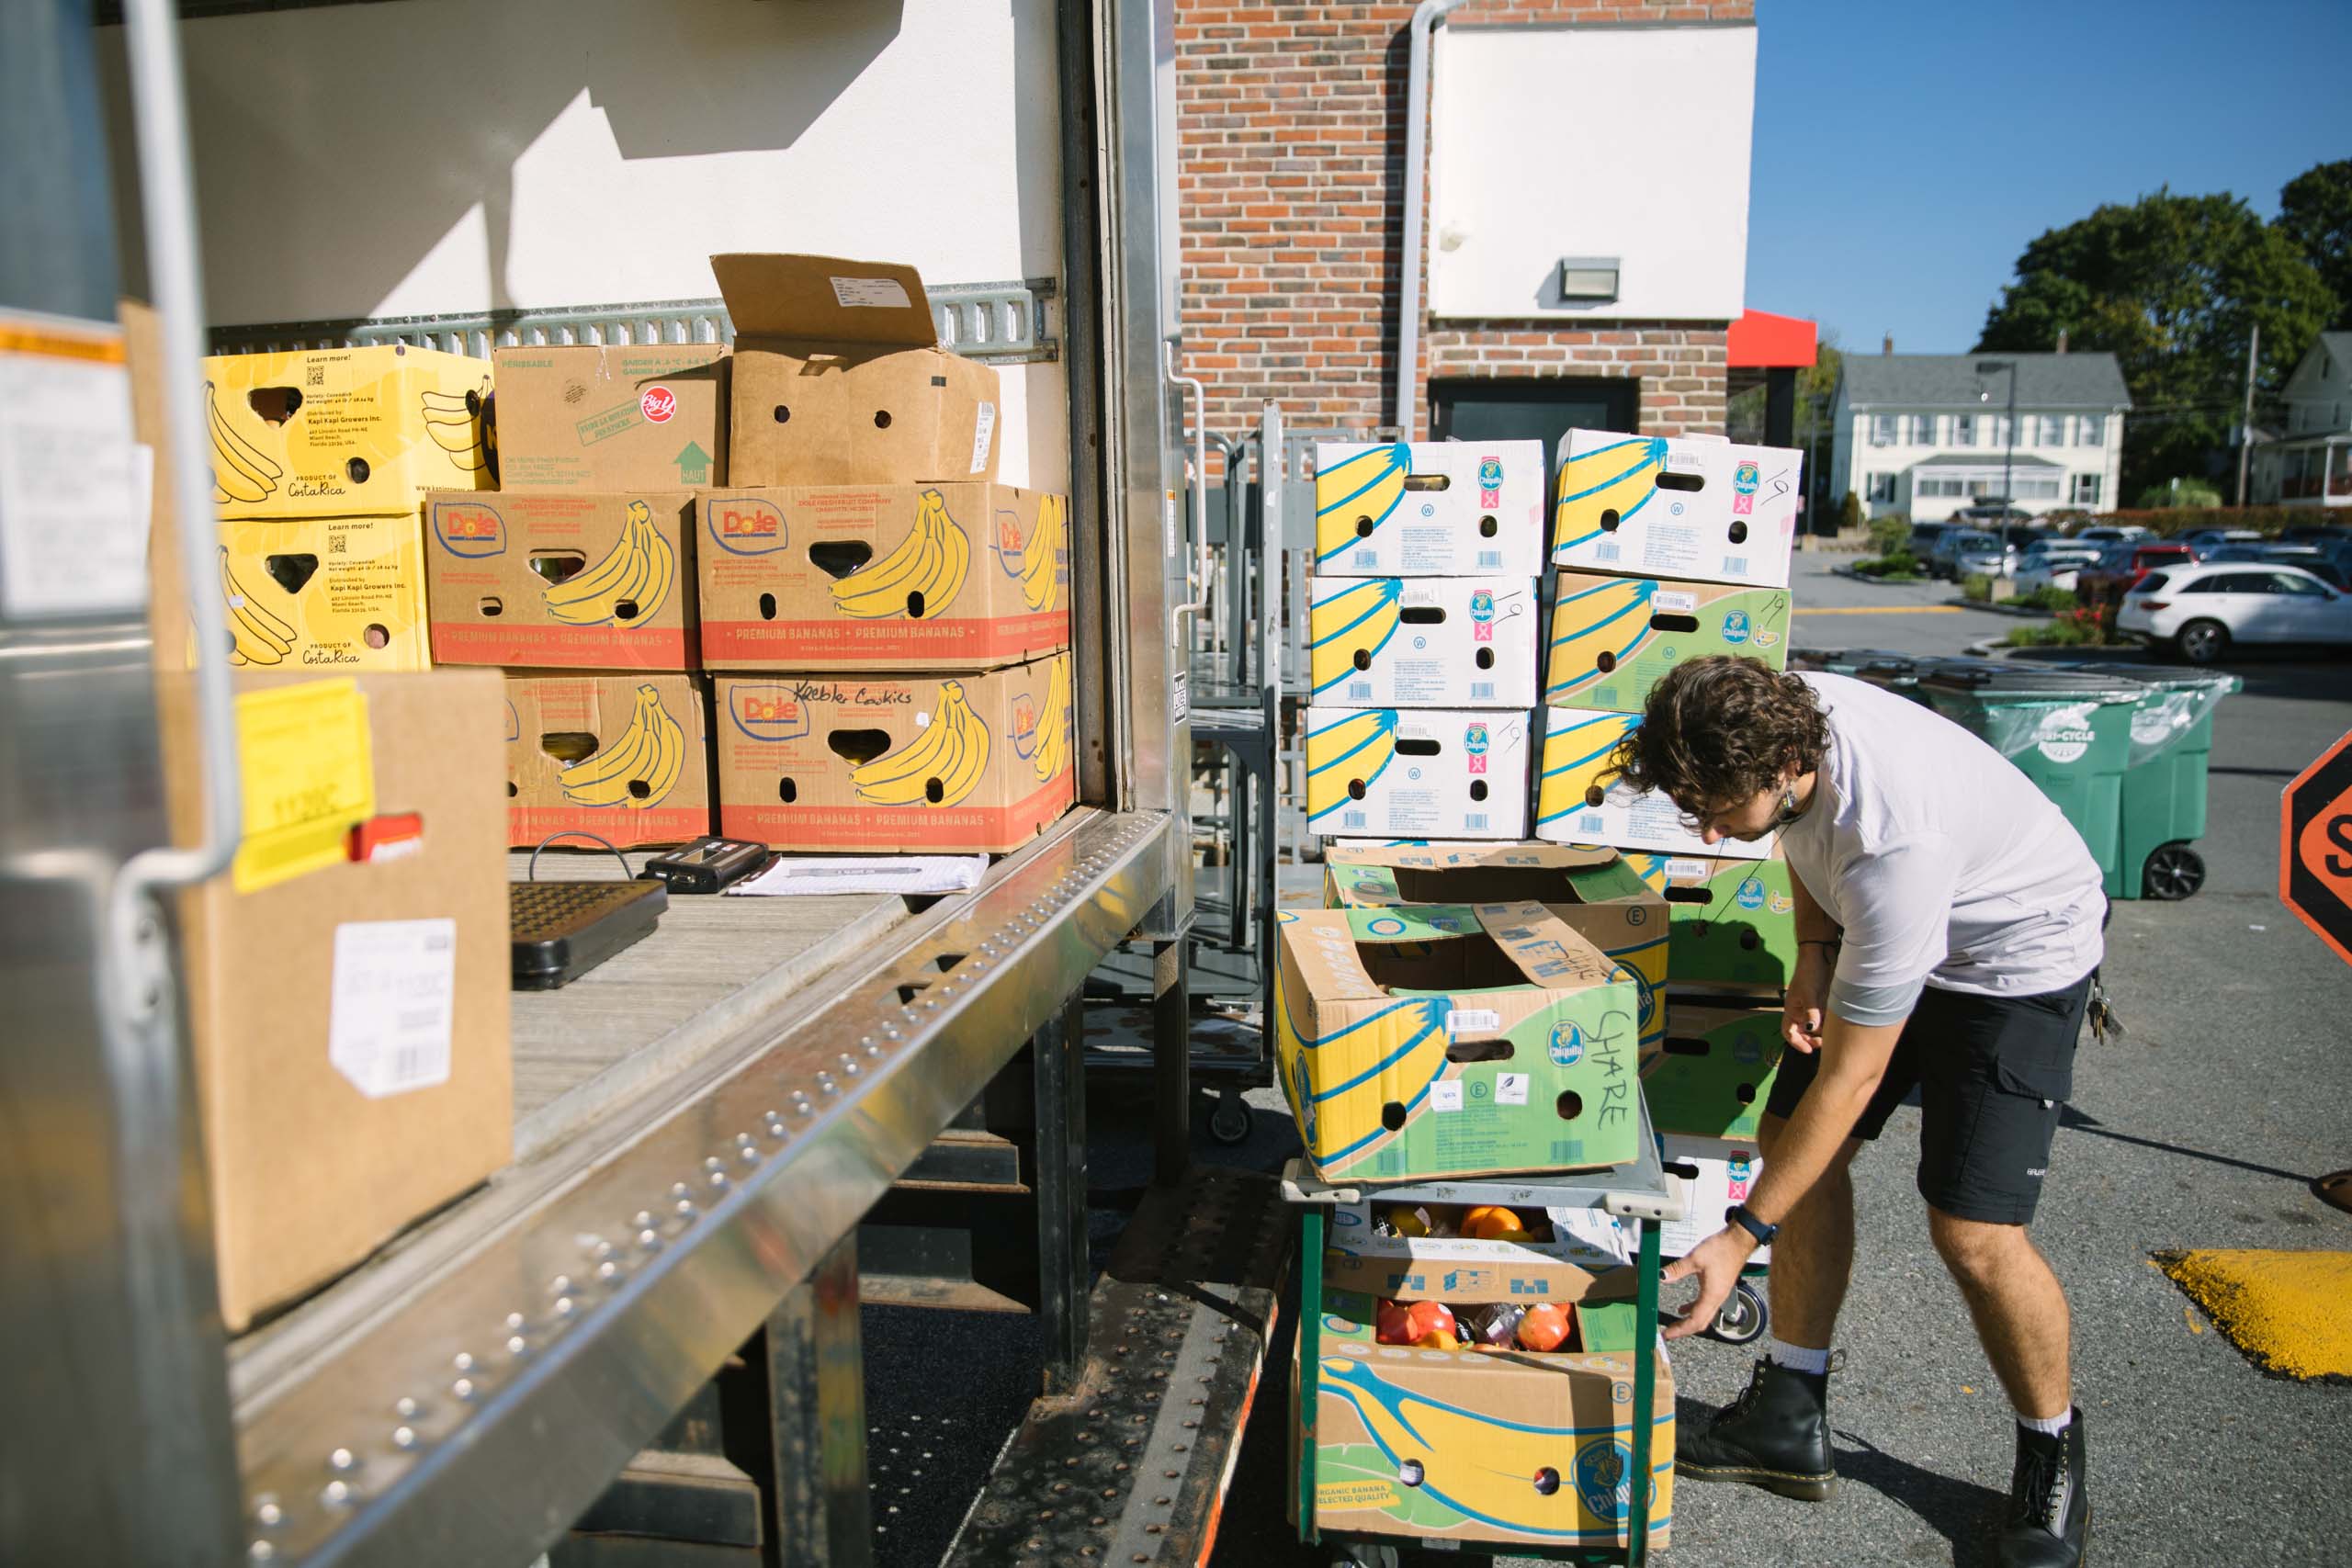 A man loading boxes into a truck while working for Boston area food recovery organization Lovin Spoonfuls.